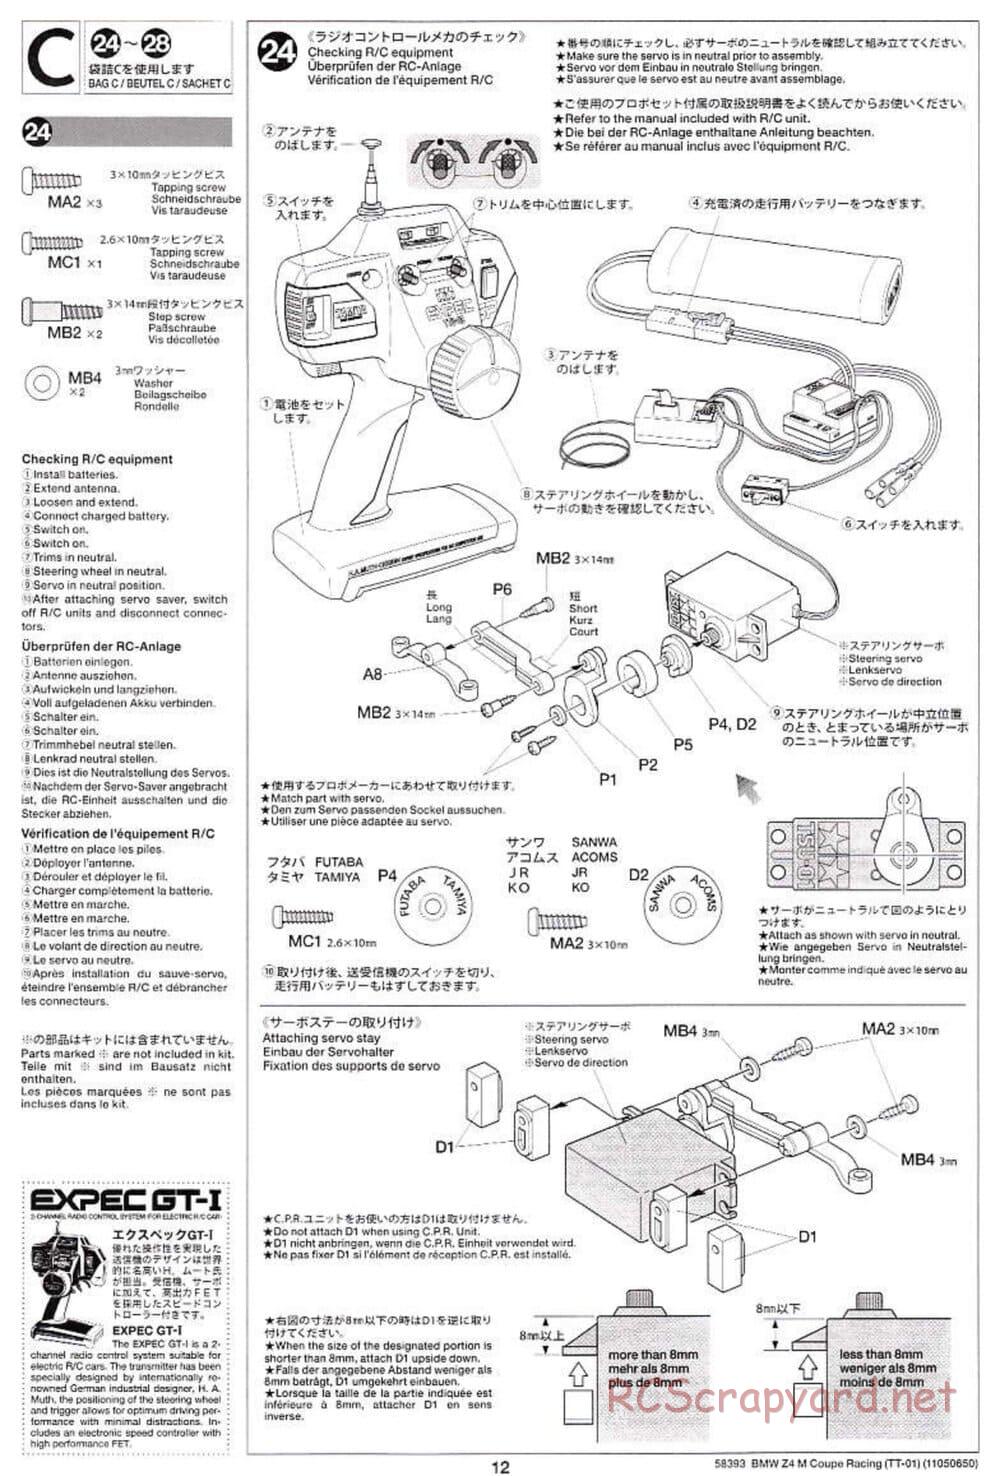 Tamiya - BMW Z4 M Coupe Racing - TT-01 Chassis - Manual - Page 12